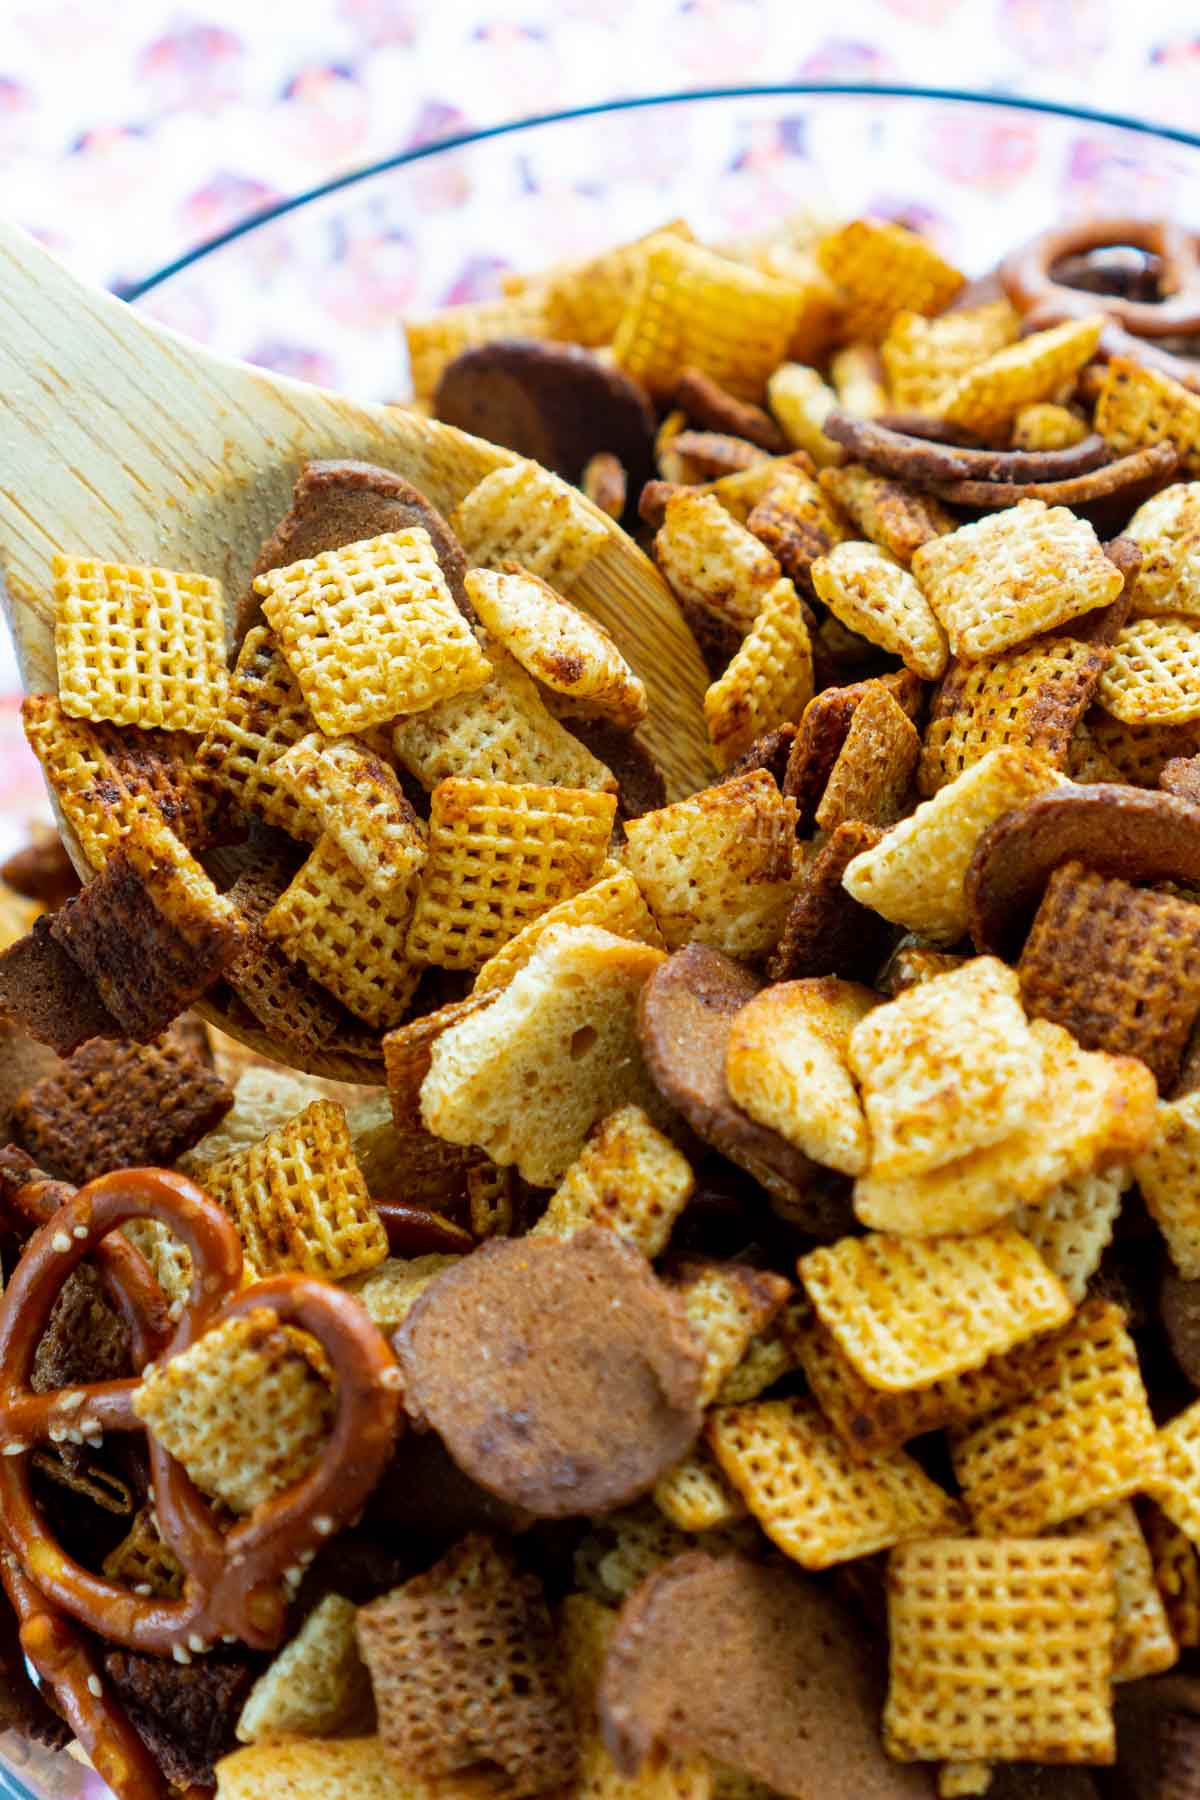 https://www.playpartyplan.com/wp-content/uploads/2020/09/homemade-chex-mix-9-of-10.jpg